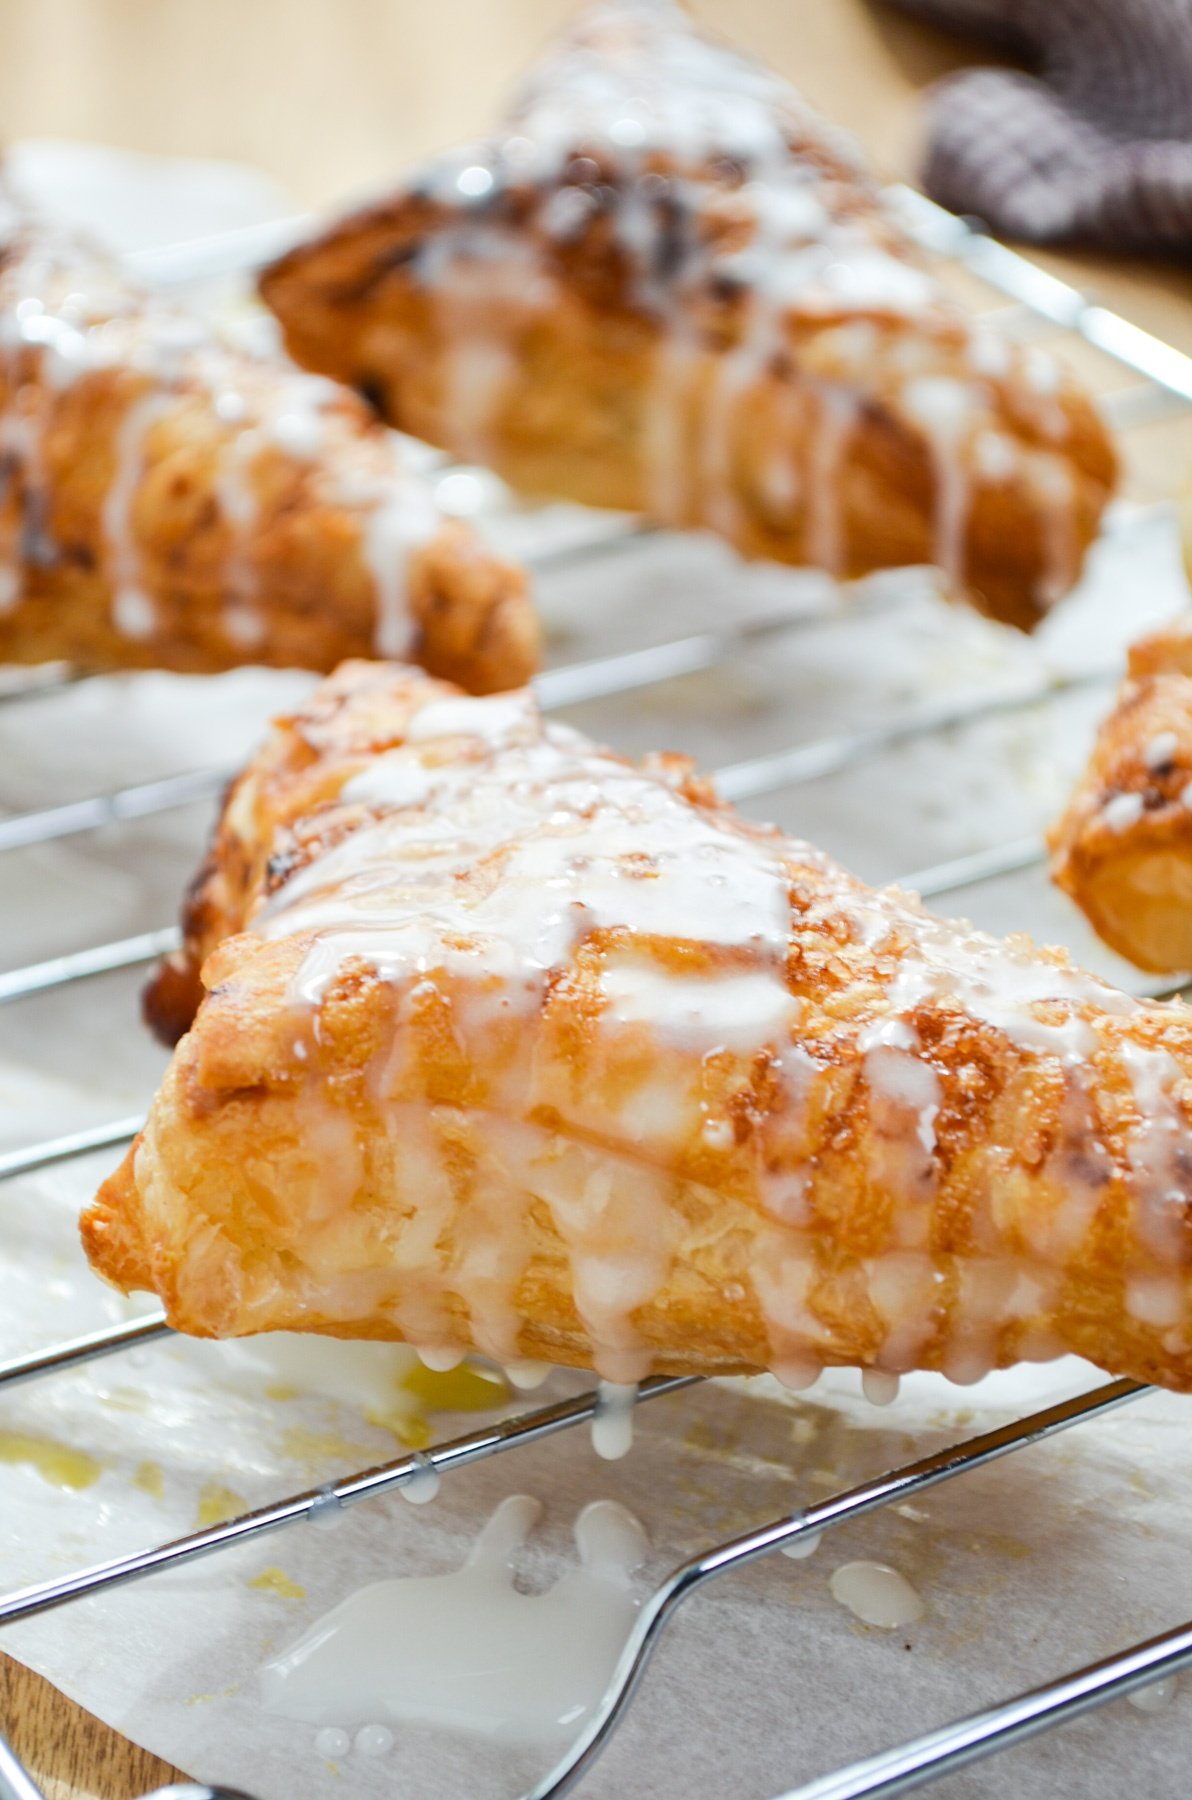 Apple turnovers on a cooling rack, drizzled with glaze.